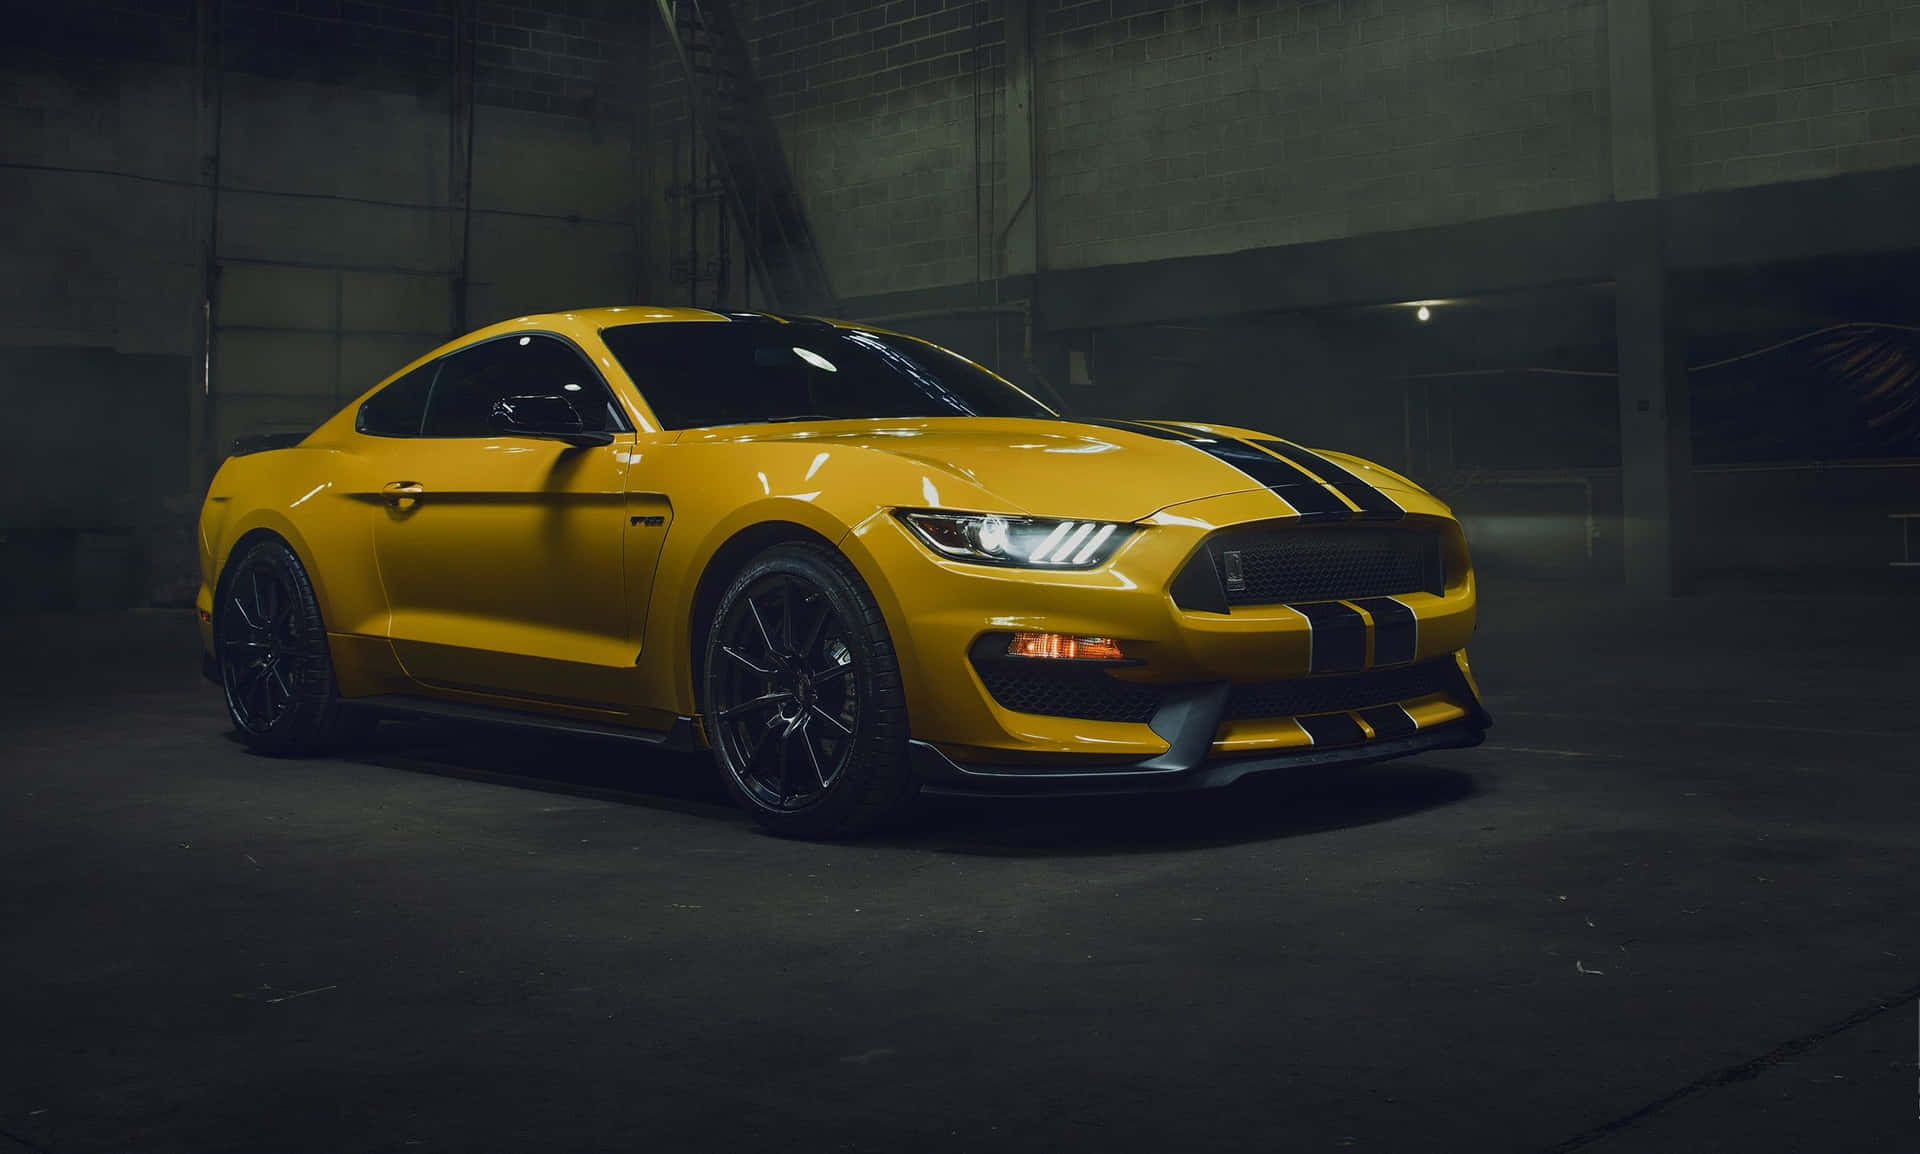 Stunning Ford Mustang Shelby GT350 in Motion Wallpaper